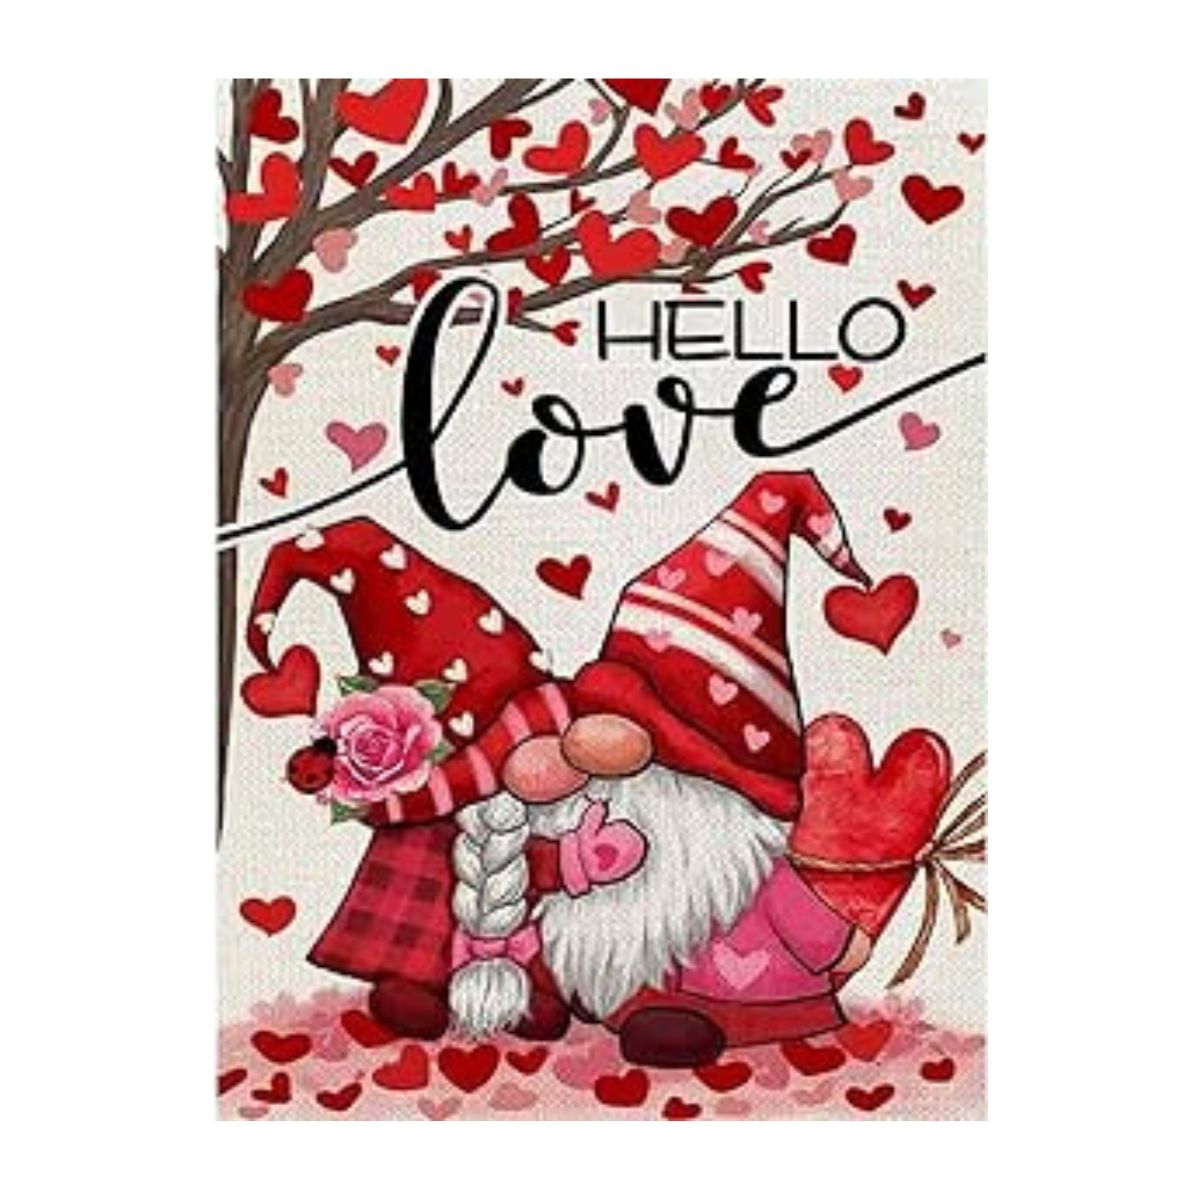  Valentine's Day Diamond Painting Kits for Adults